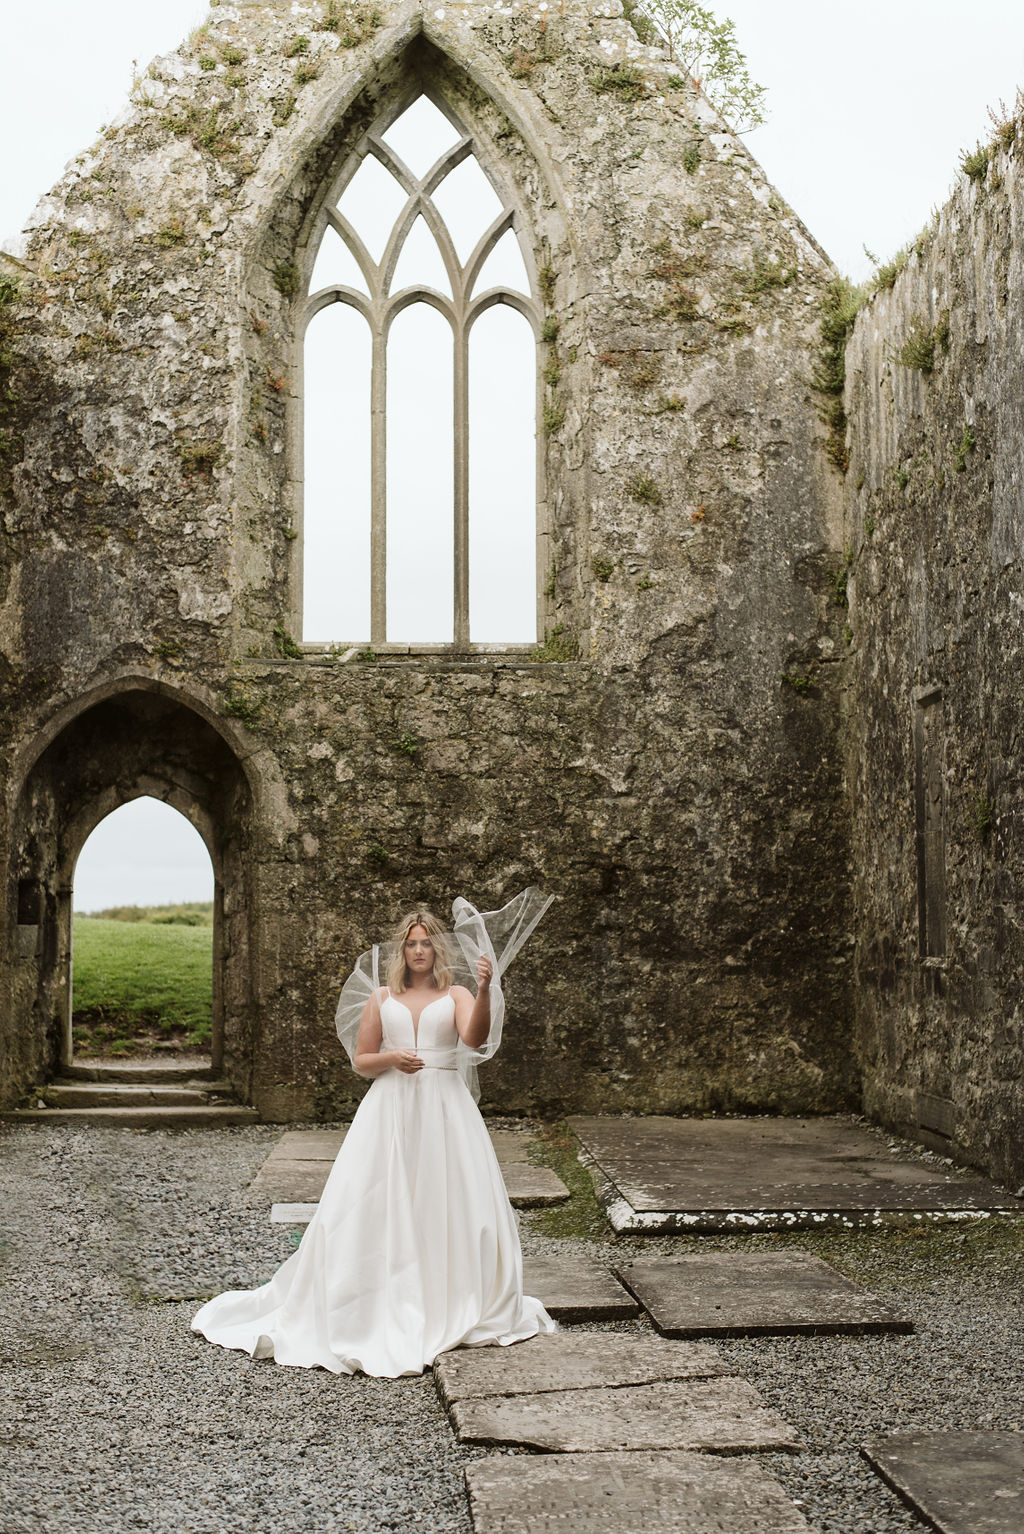 Wind blowing the tulle wings on a bride wearing a mikado ballgown wedding dress with beaded waist banding at Ross Errilly Friary in Ireland